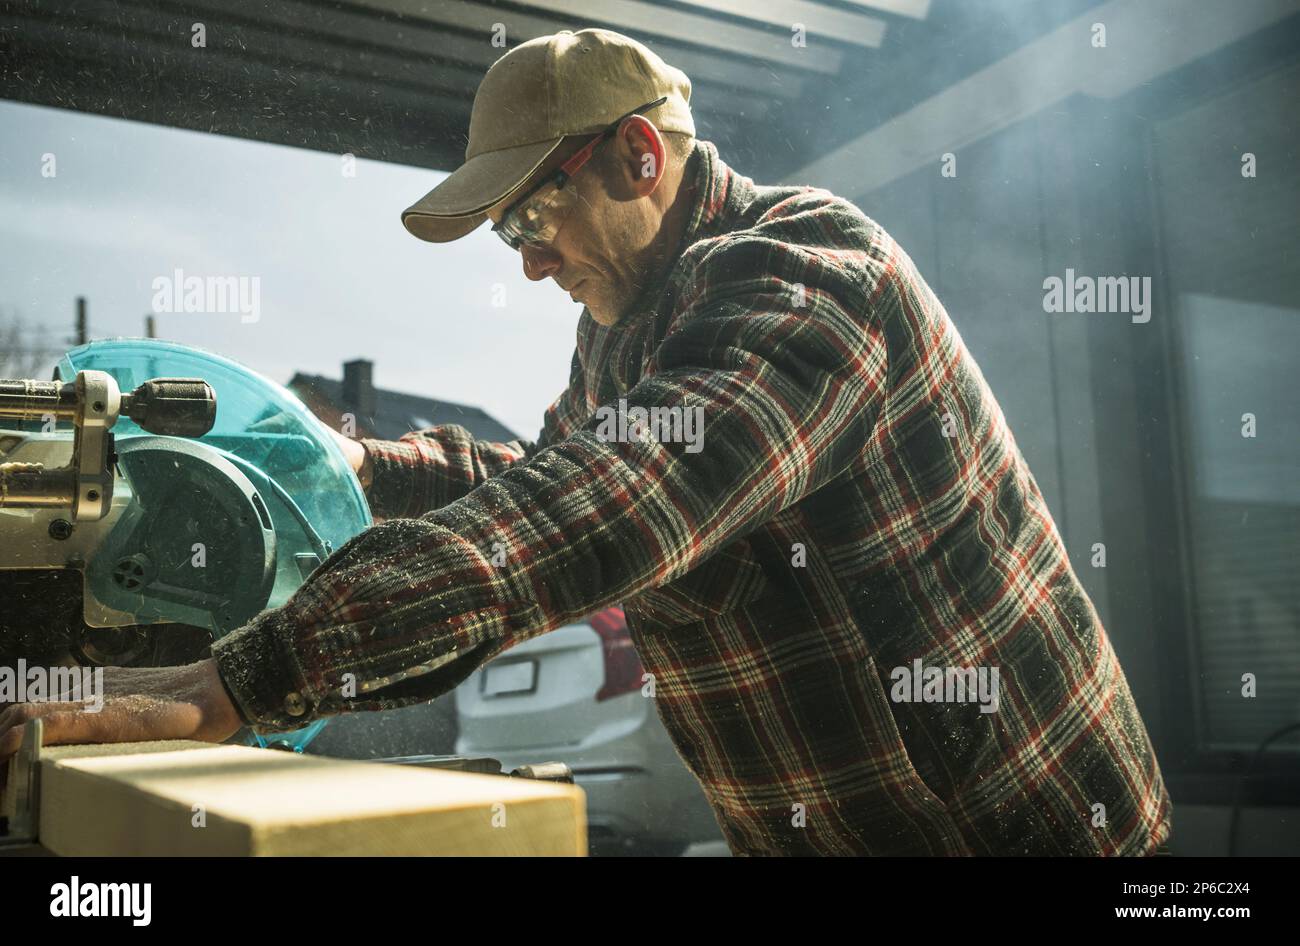 Woodworker Contractor Cutting Wood Beams To Size. Small Construction Project Theme. Stock Photo